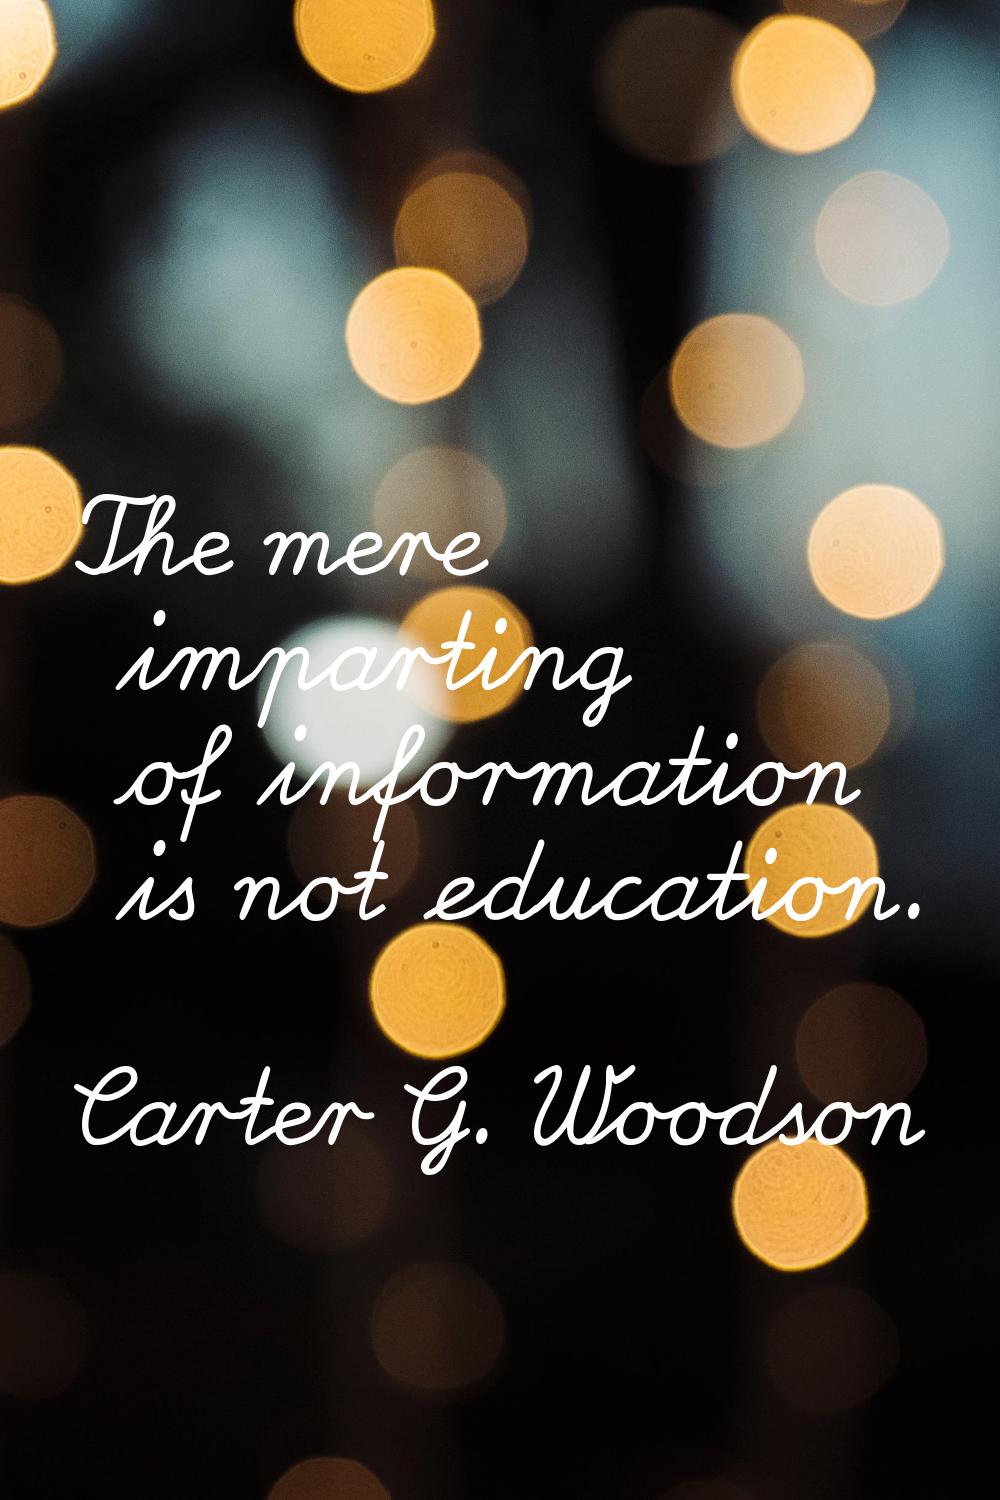 The mere imparting of information is not education.